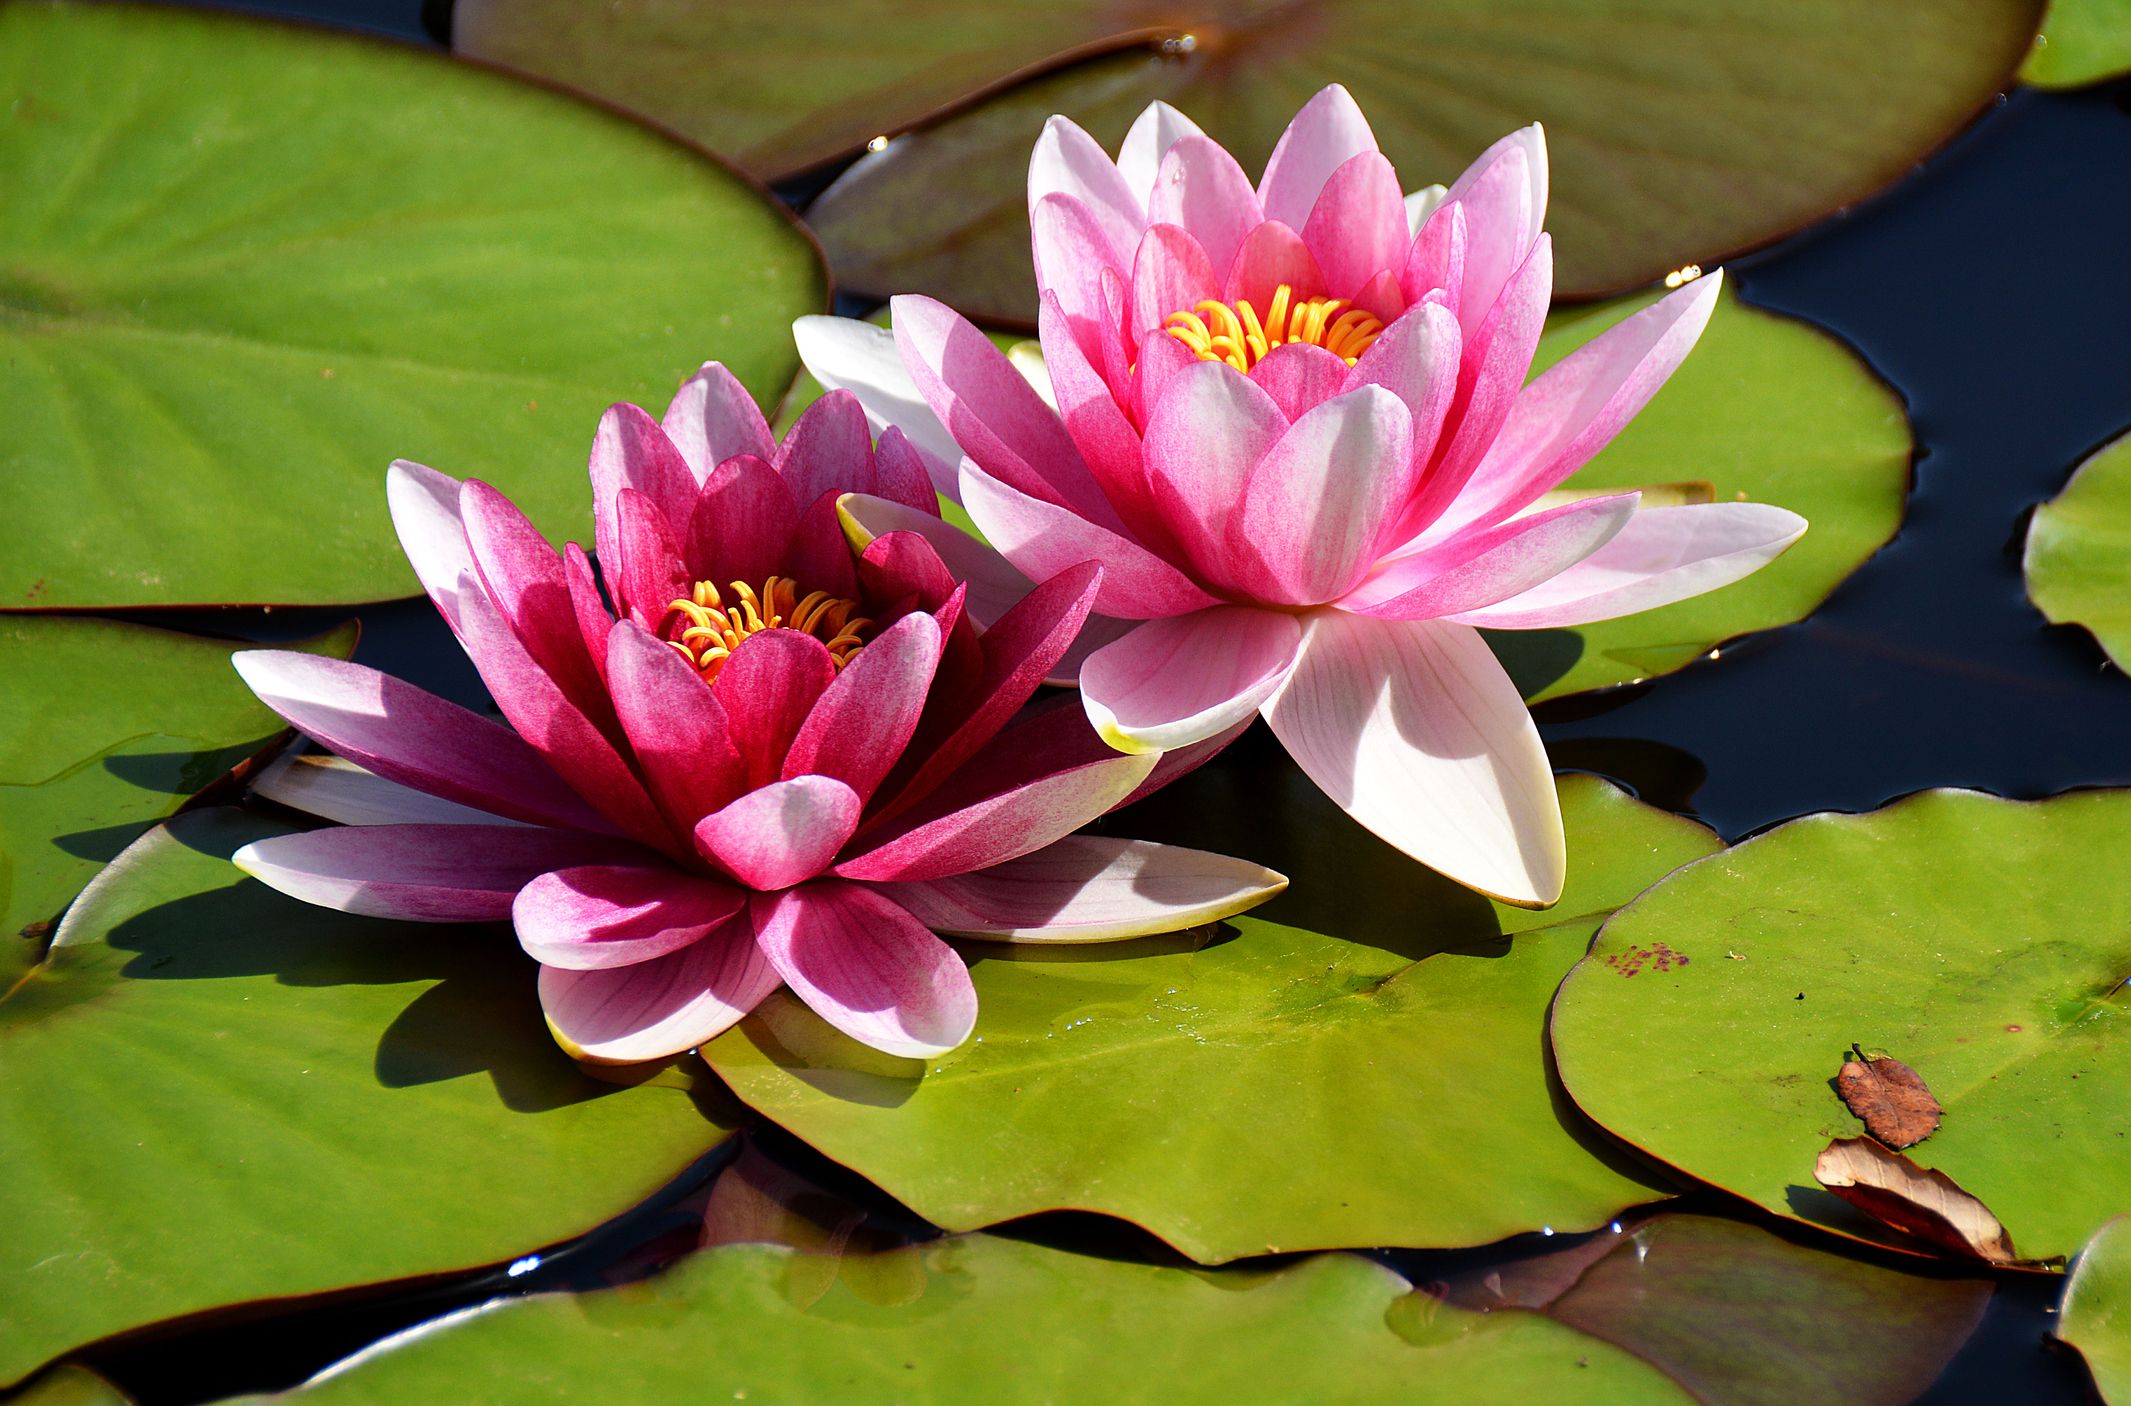 The Real Meaning of the Lotus Flower